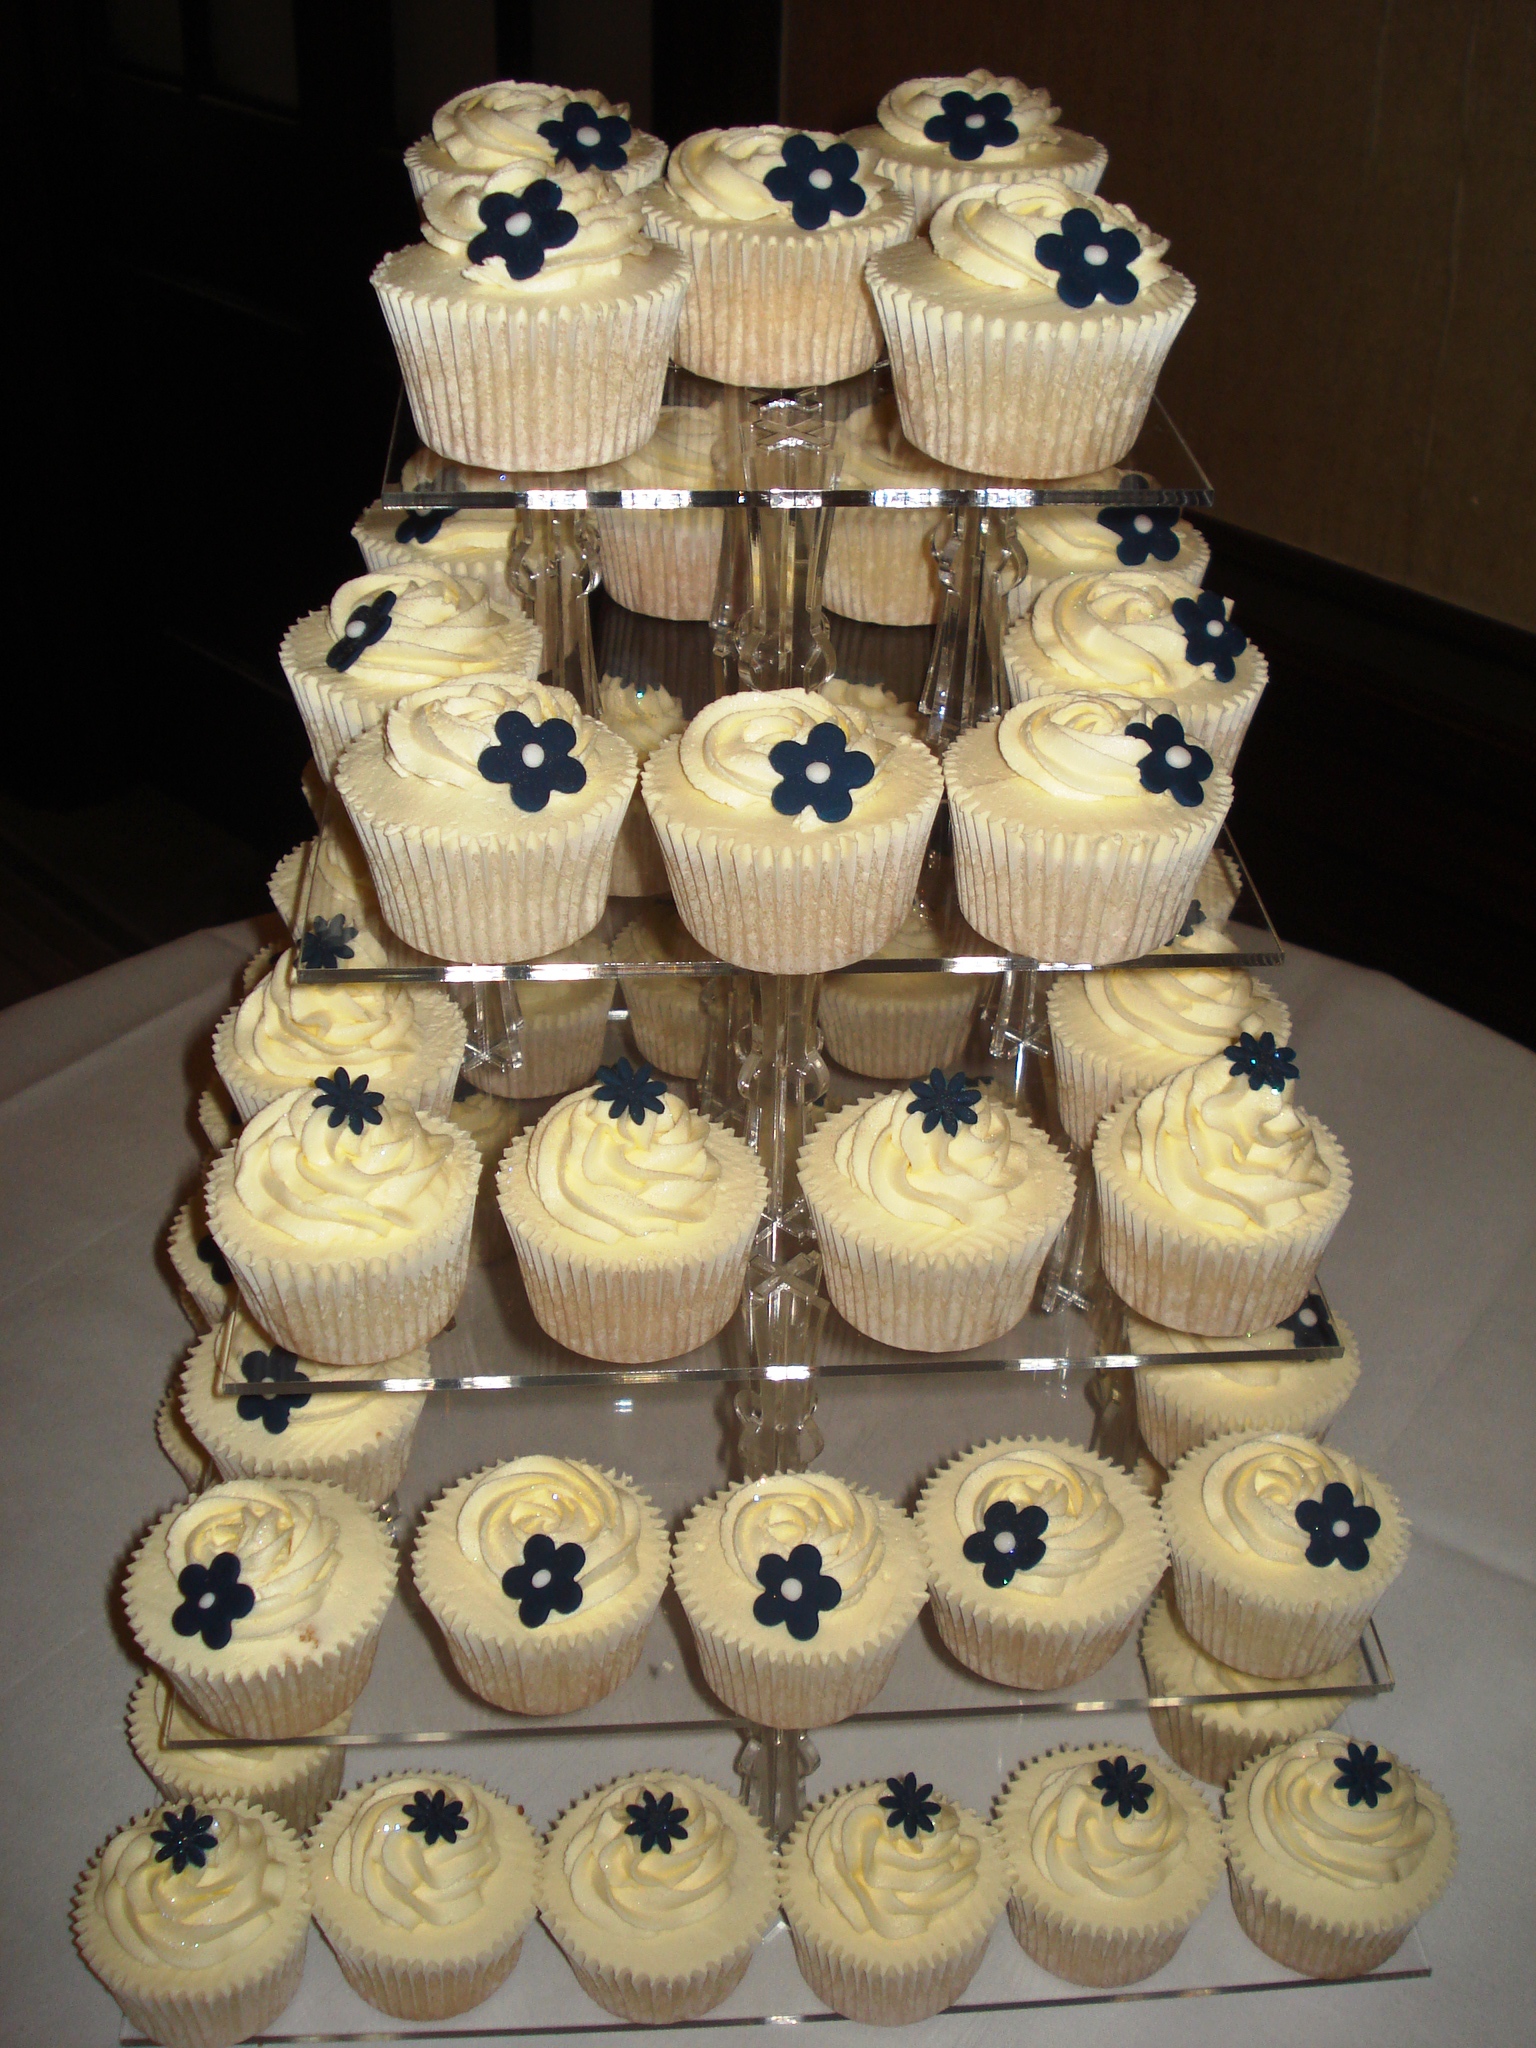 Ivory and navy wedding cupcakes Decorations